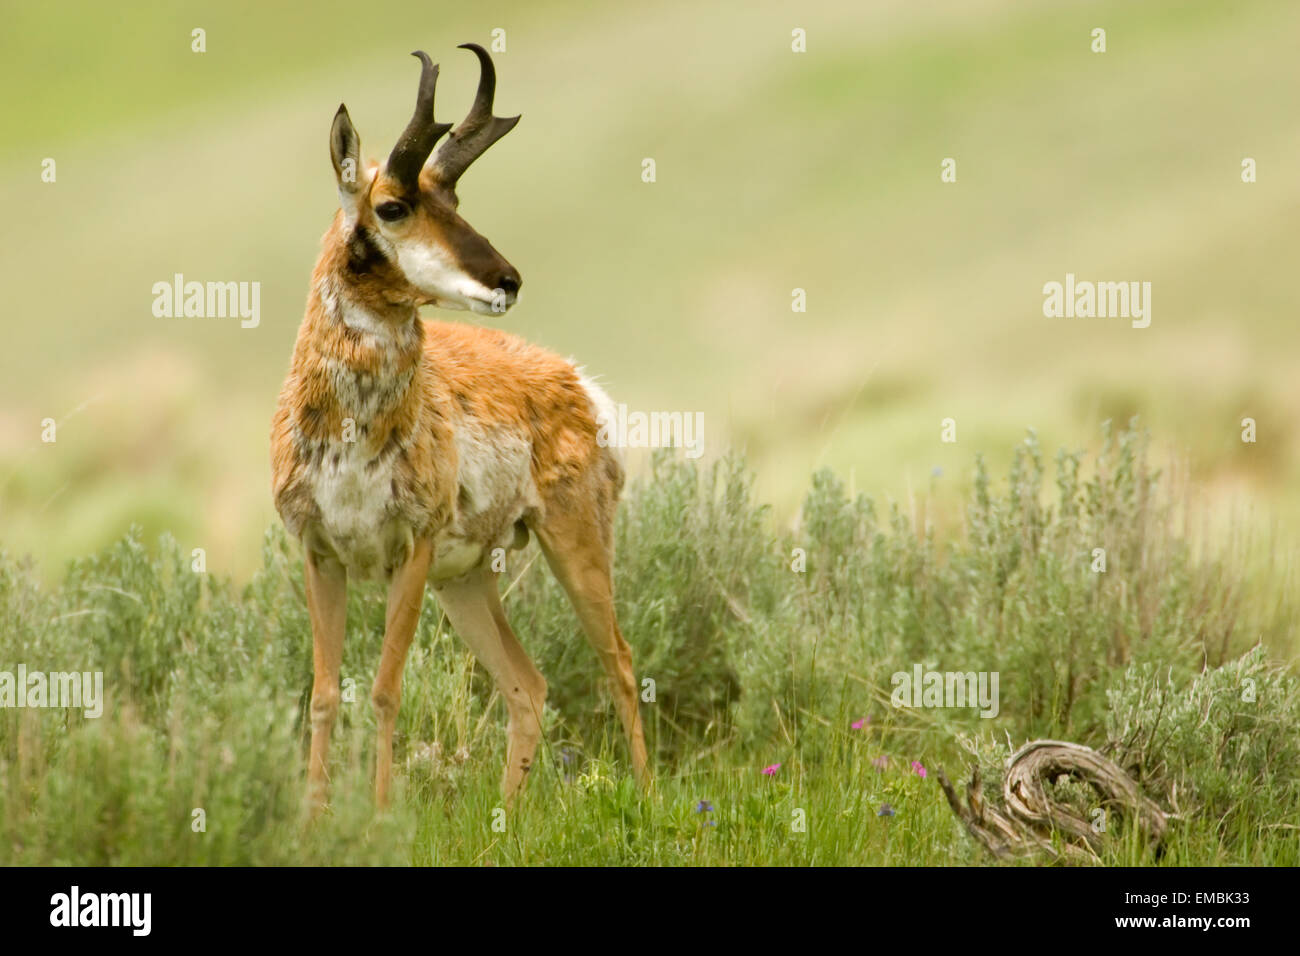 Shaggy male Pronghorn or American Antelope (Antilocapra americana) in Yellowstone National Park, Wyoming, USA Stock Photo